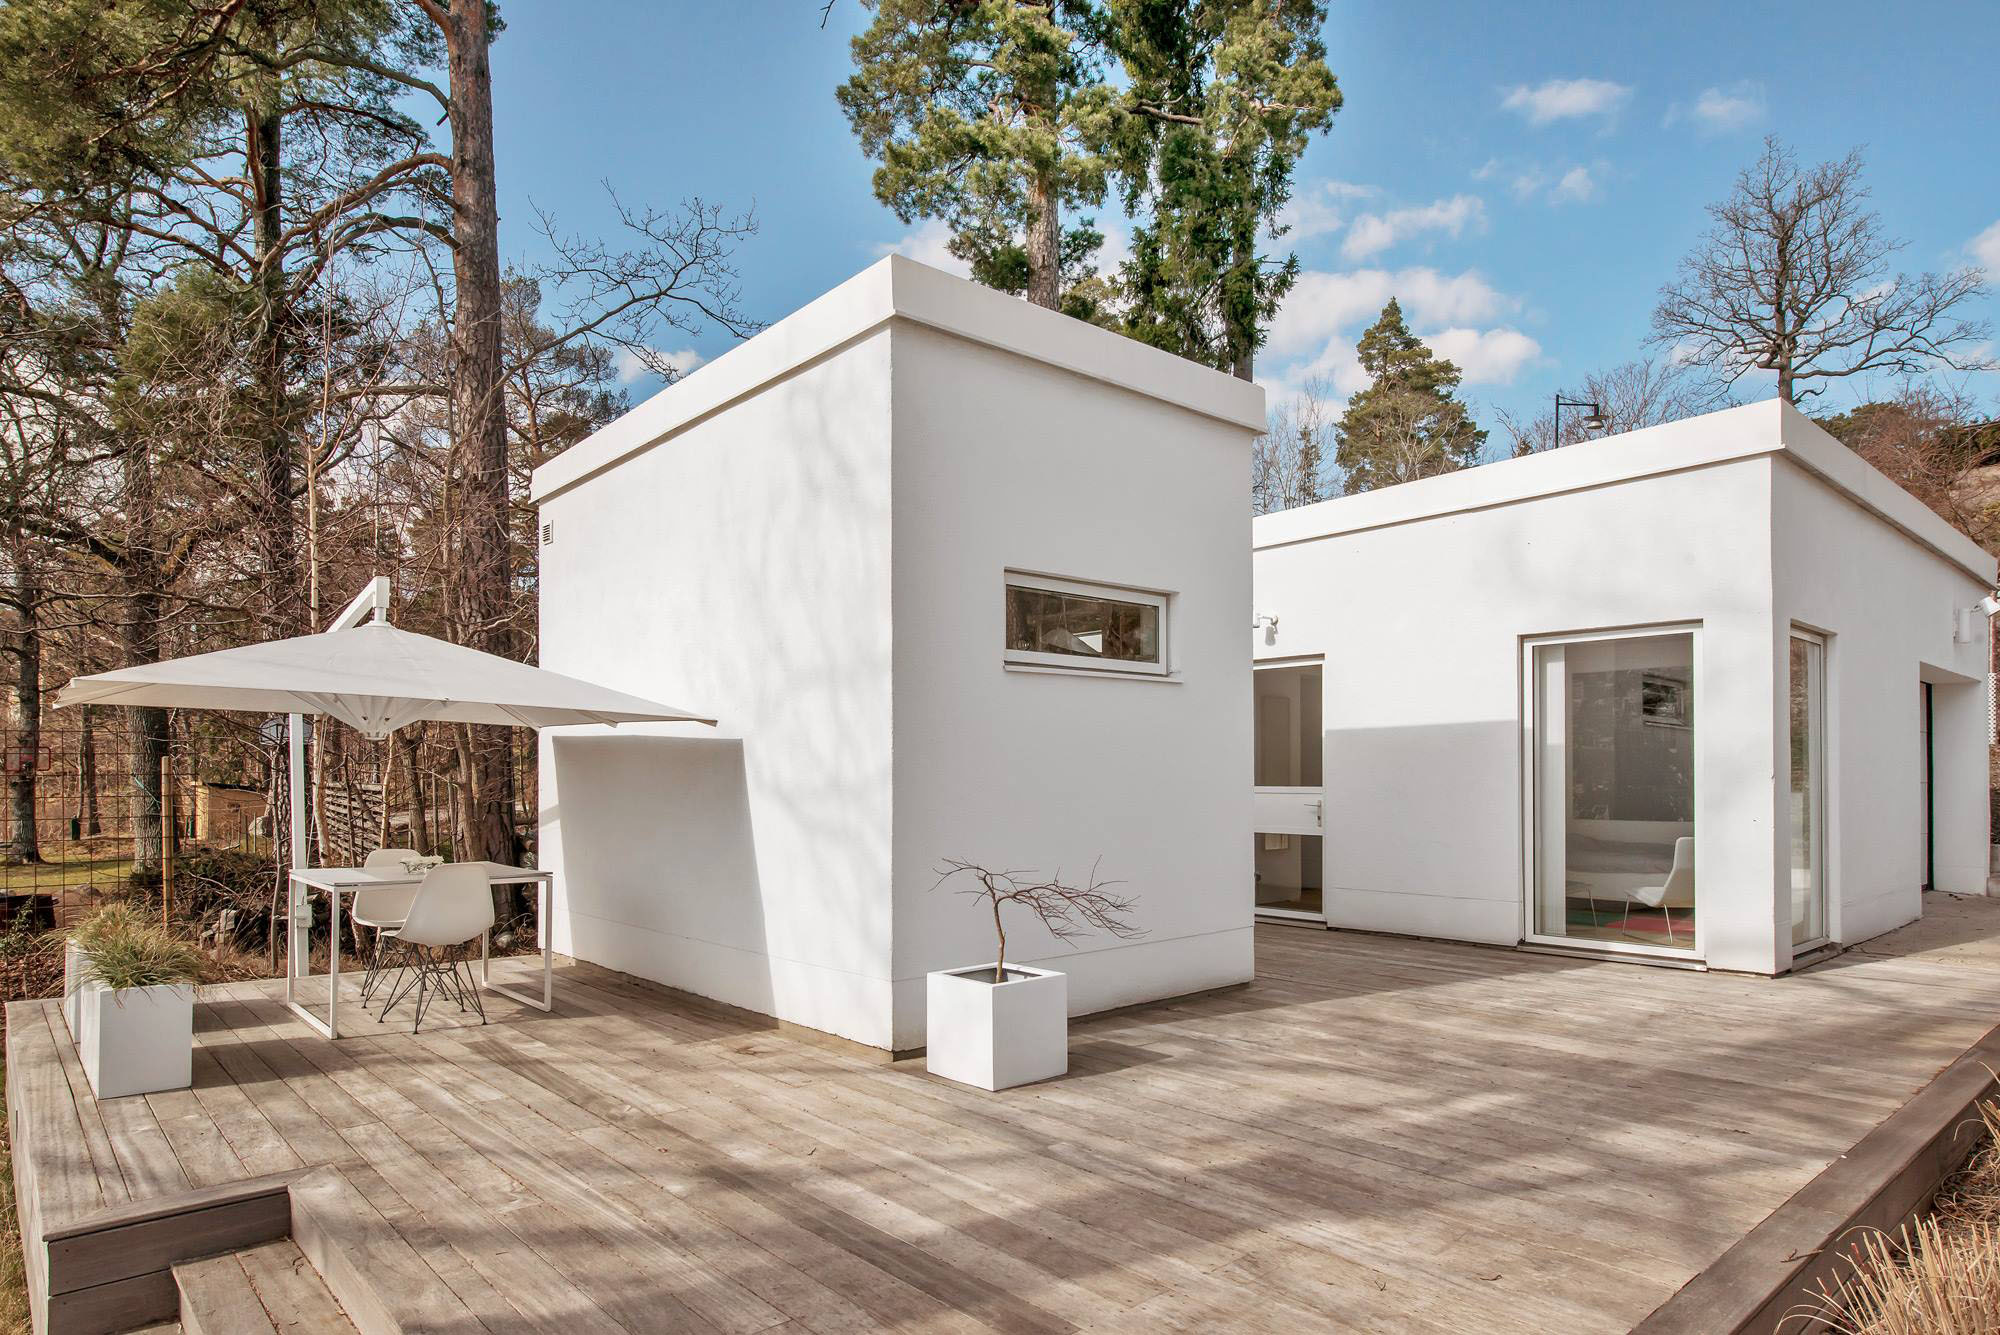 White Painted Near Cool White Painted Modern Villa Near Stockholm Pavilions Featured With Large Deck With Dining Space And Awning Dream Homes Stunningly Beautiful Villa Decorated In Modern Scandinavian Style